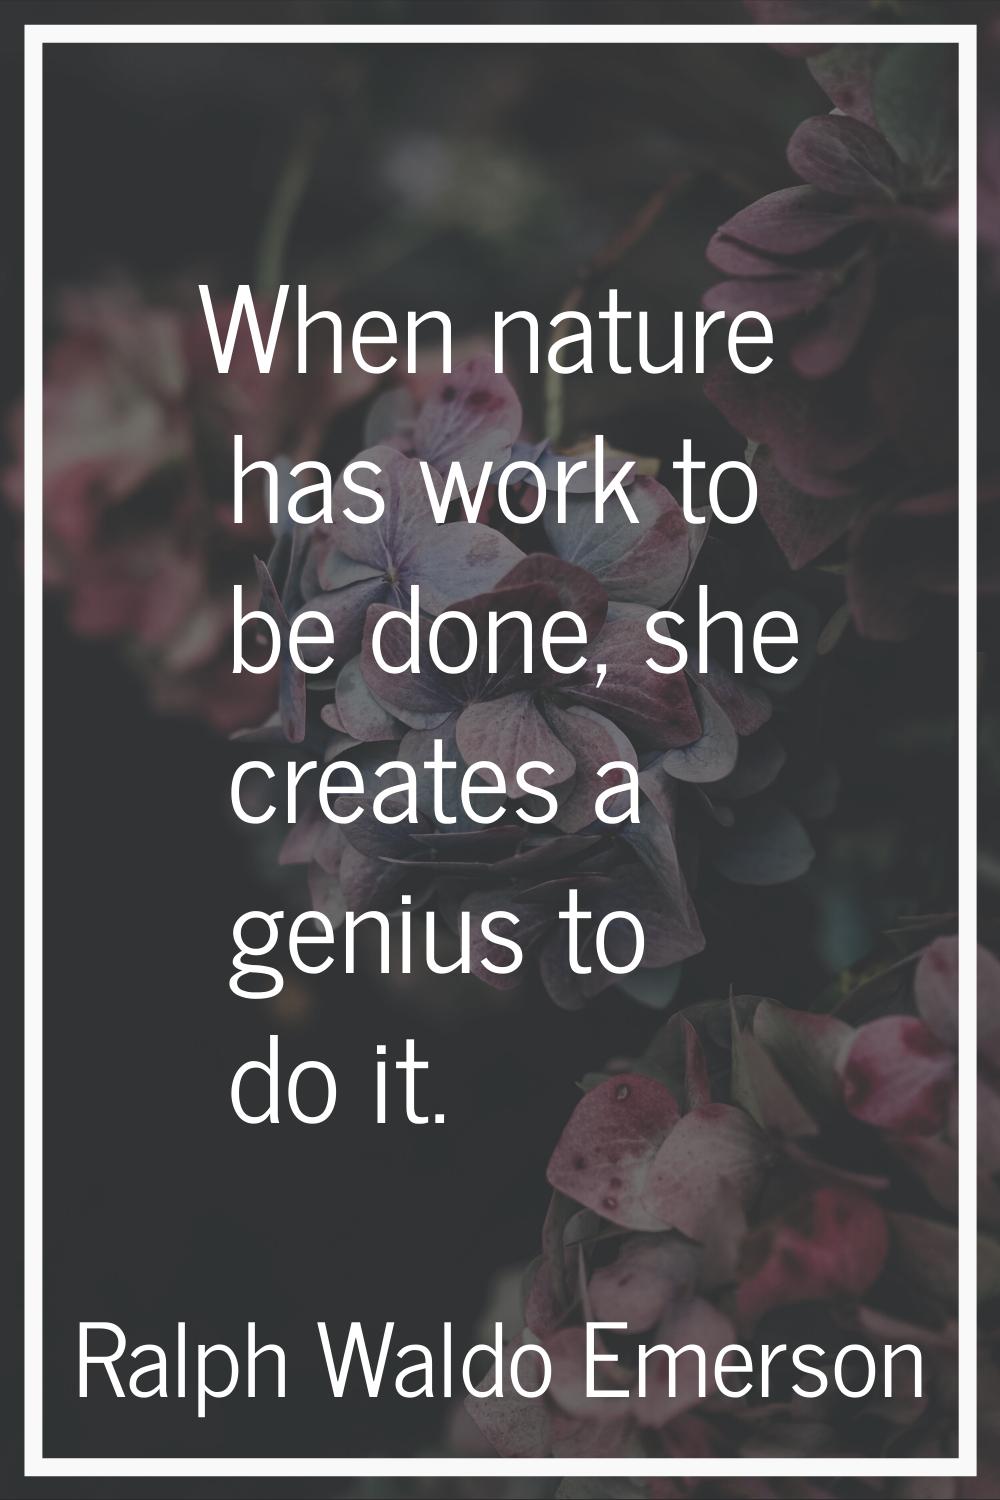 When nature has work to be done, she creates a genius to do it.